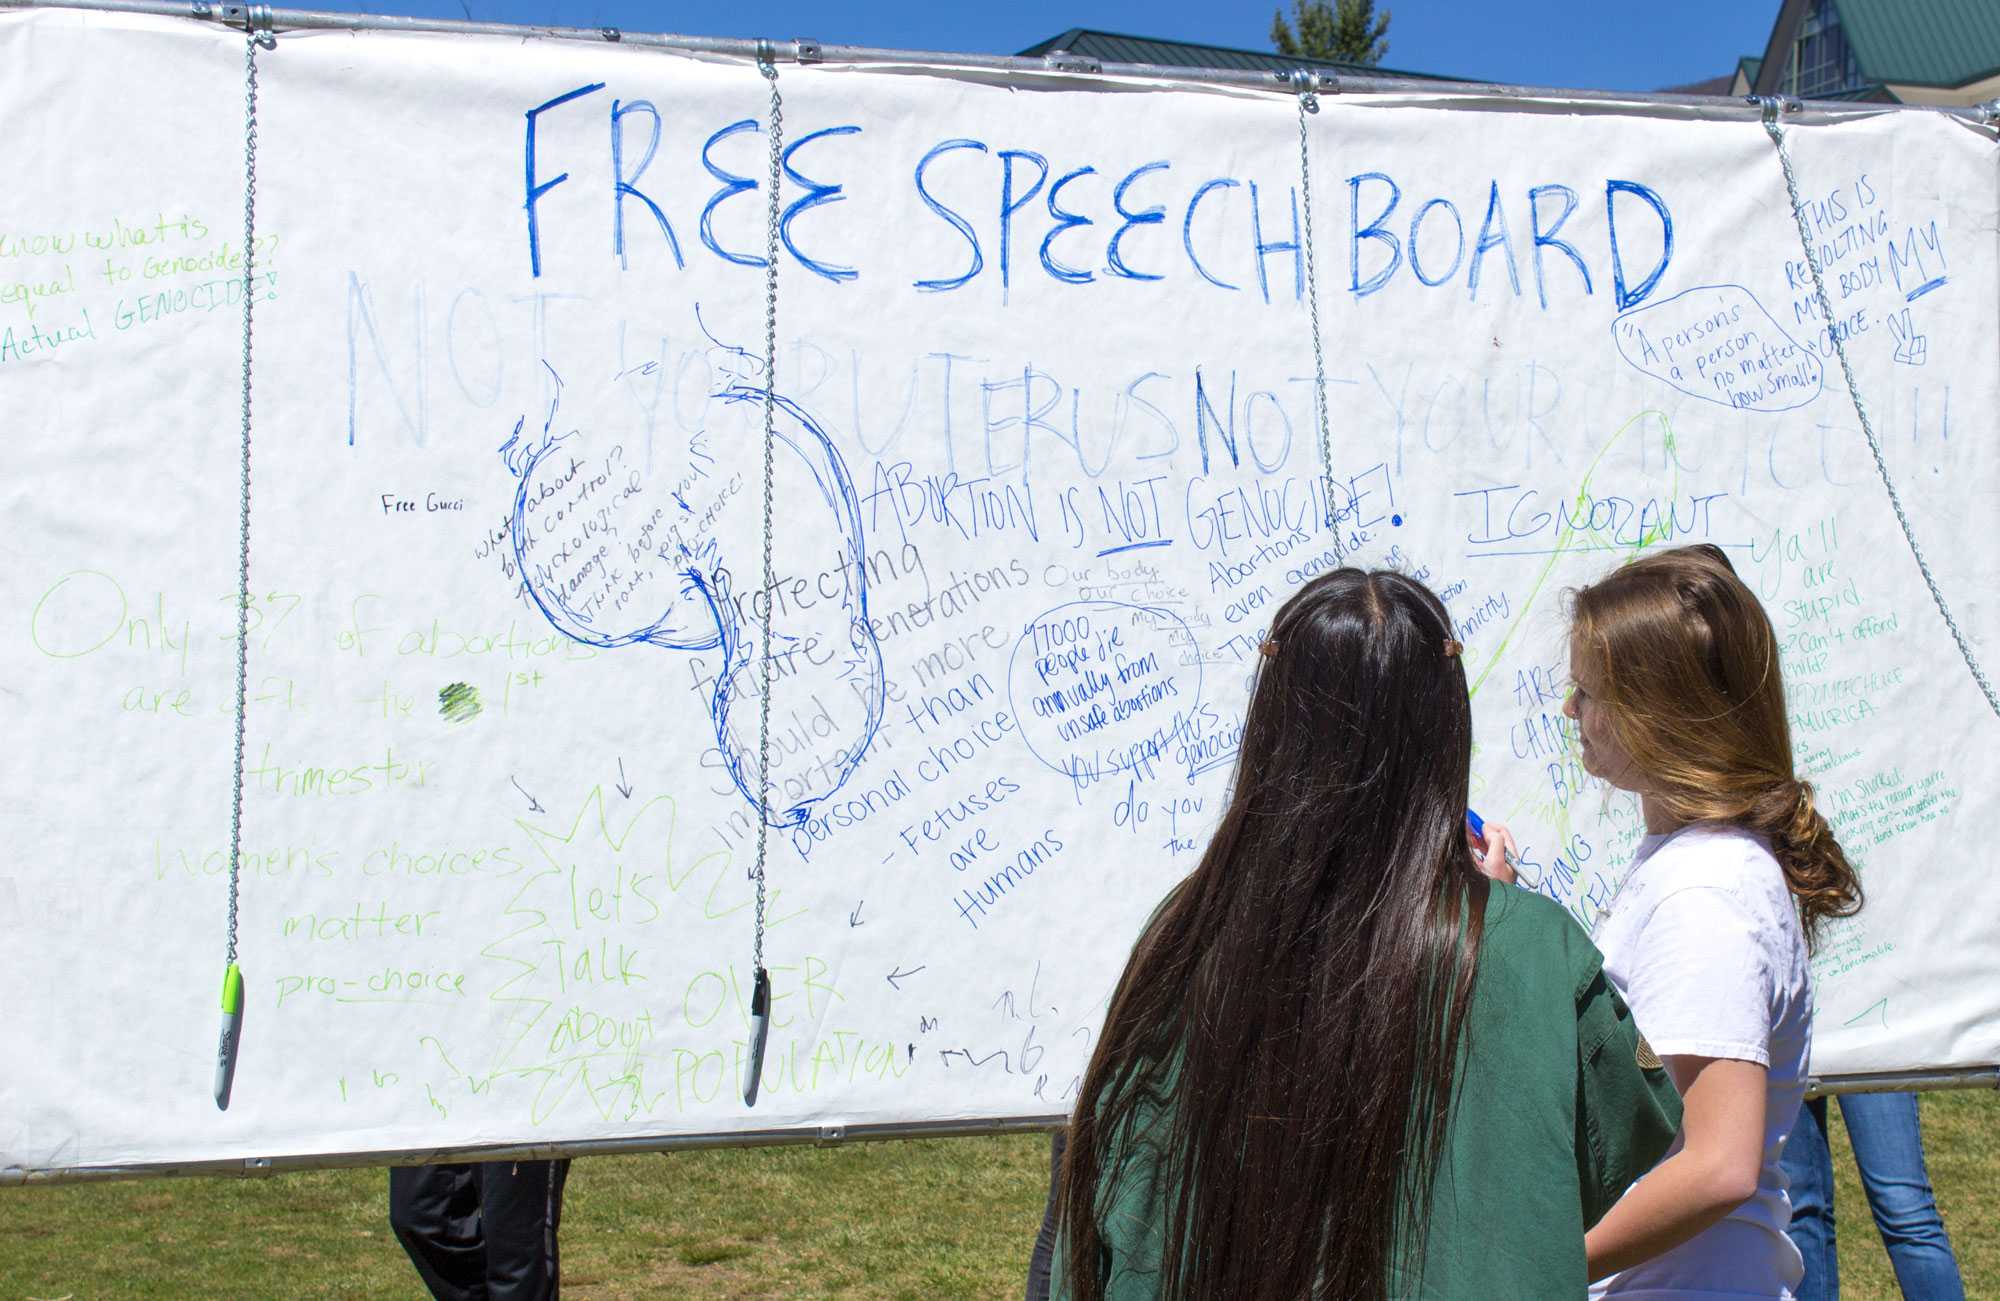 Free speech board that was on Sanfrod Mall during an anti-abortion protest back in march. The protest was held by an organization called AbortionNO.